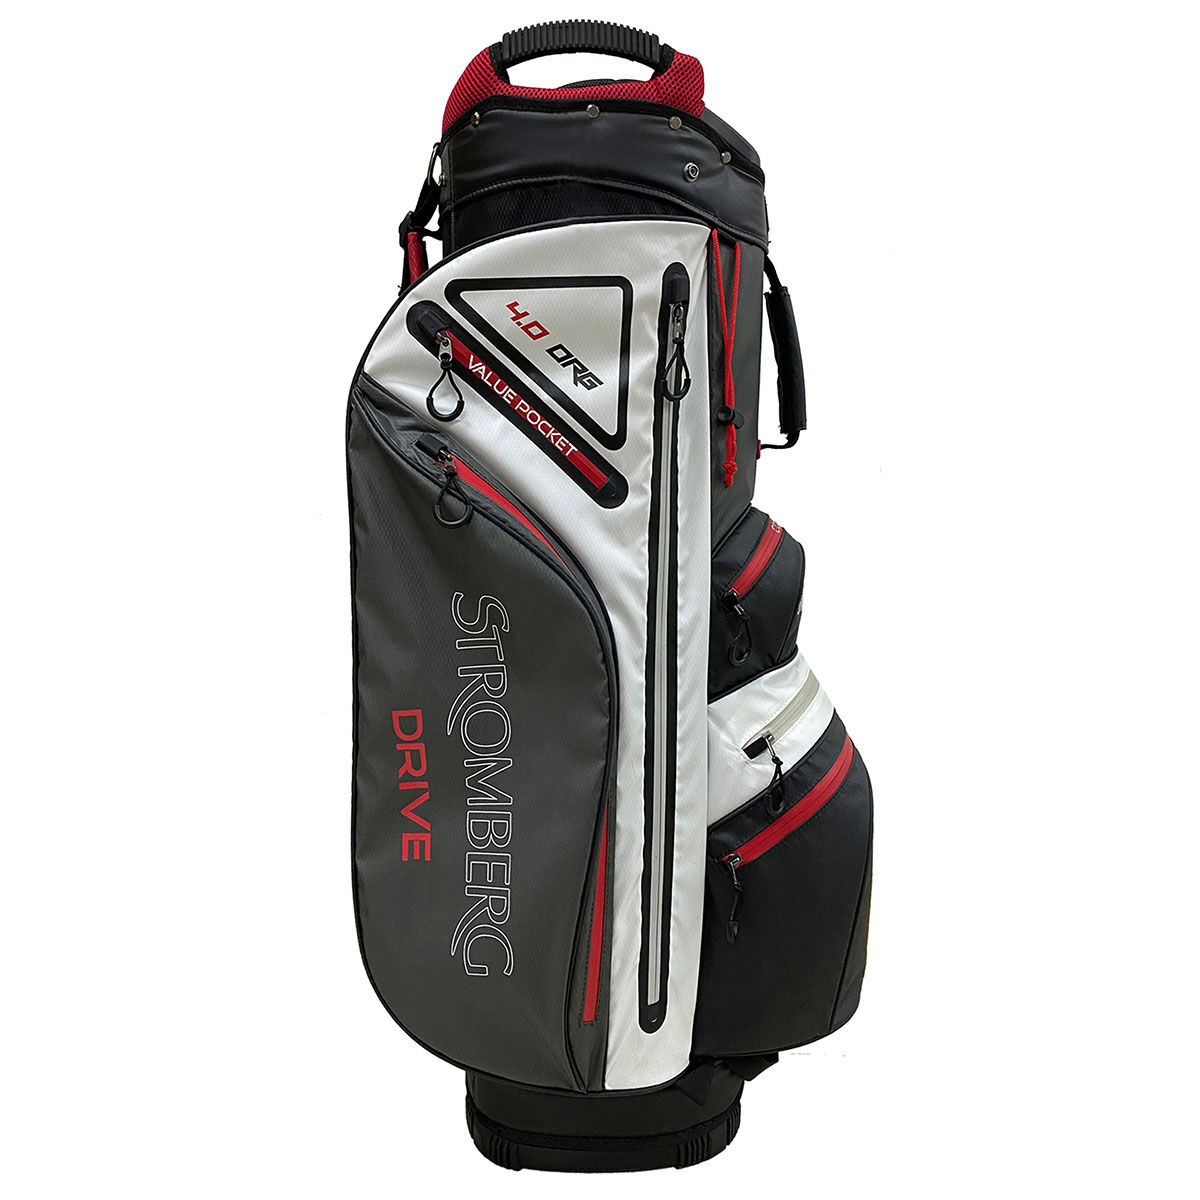 Stromberg Drive Organiser 4.0 Waterproof Golf Cart Bag, Black/ white/ red, One Size | American Golf - Father's Day Gift von Stromberg